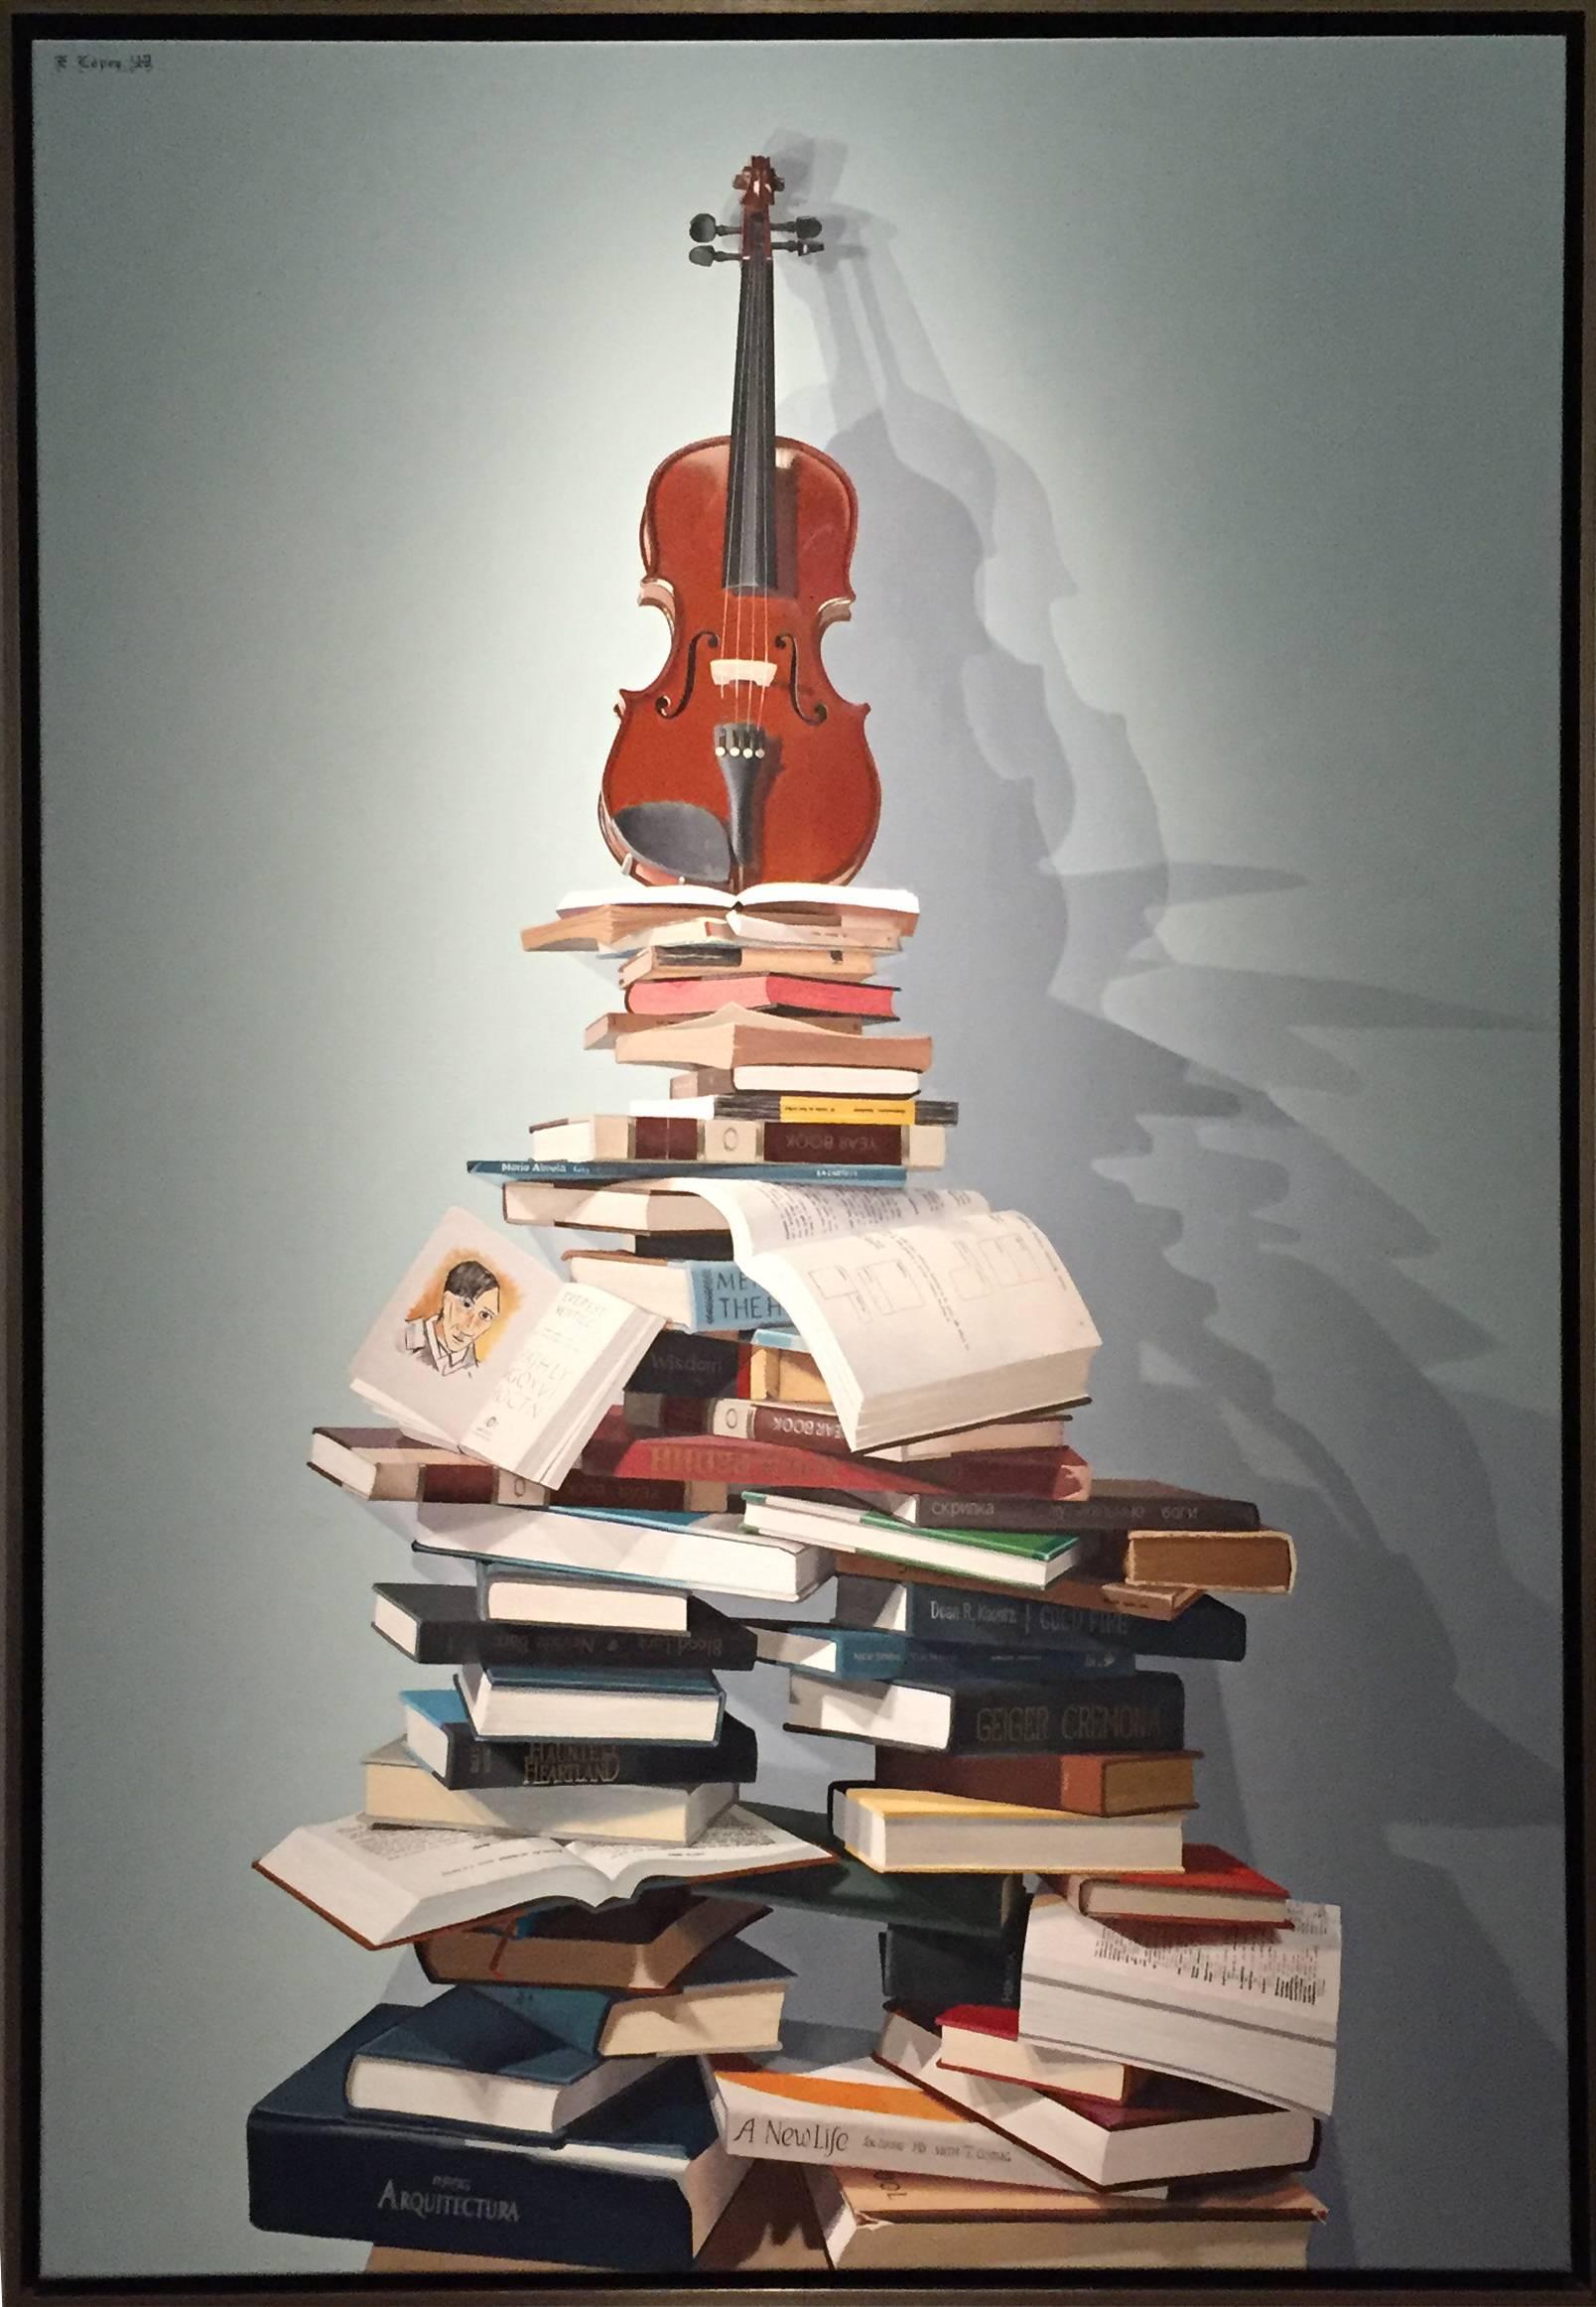 Ernesto López Sao Interior Painting - "Cremora Tower"  2014 large Cuban oil / canvas Books and Violin LARGE vertical